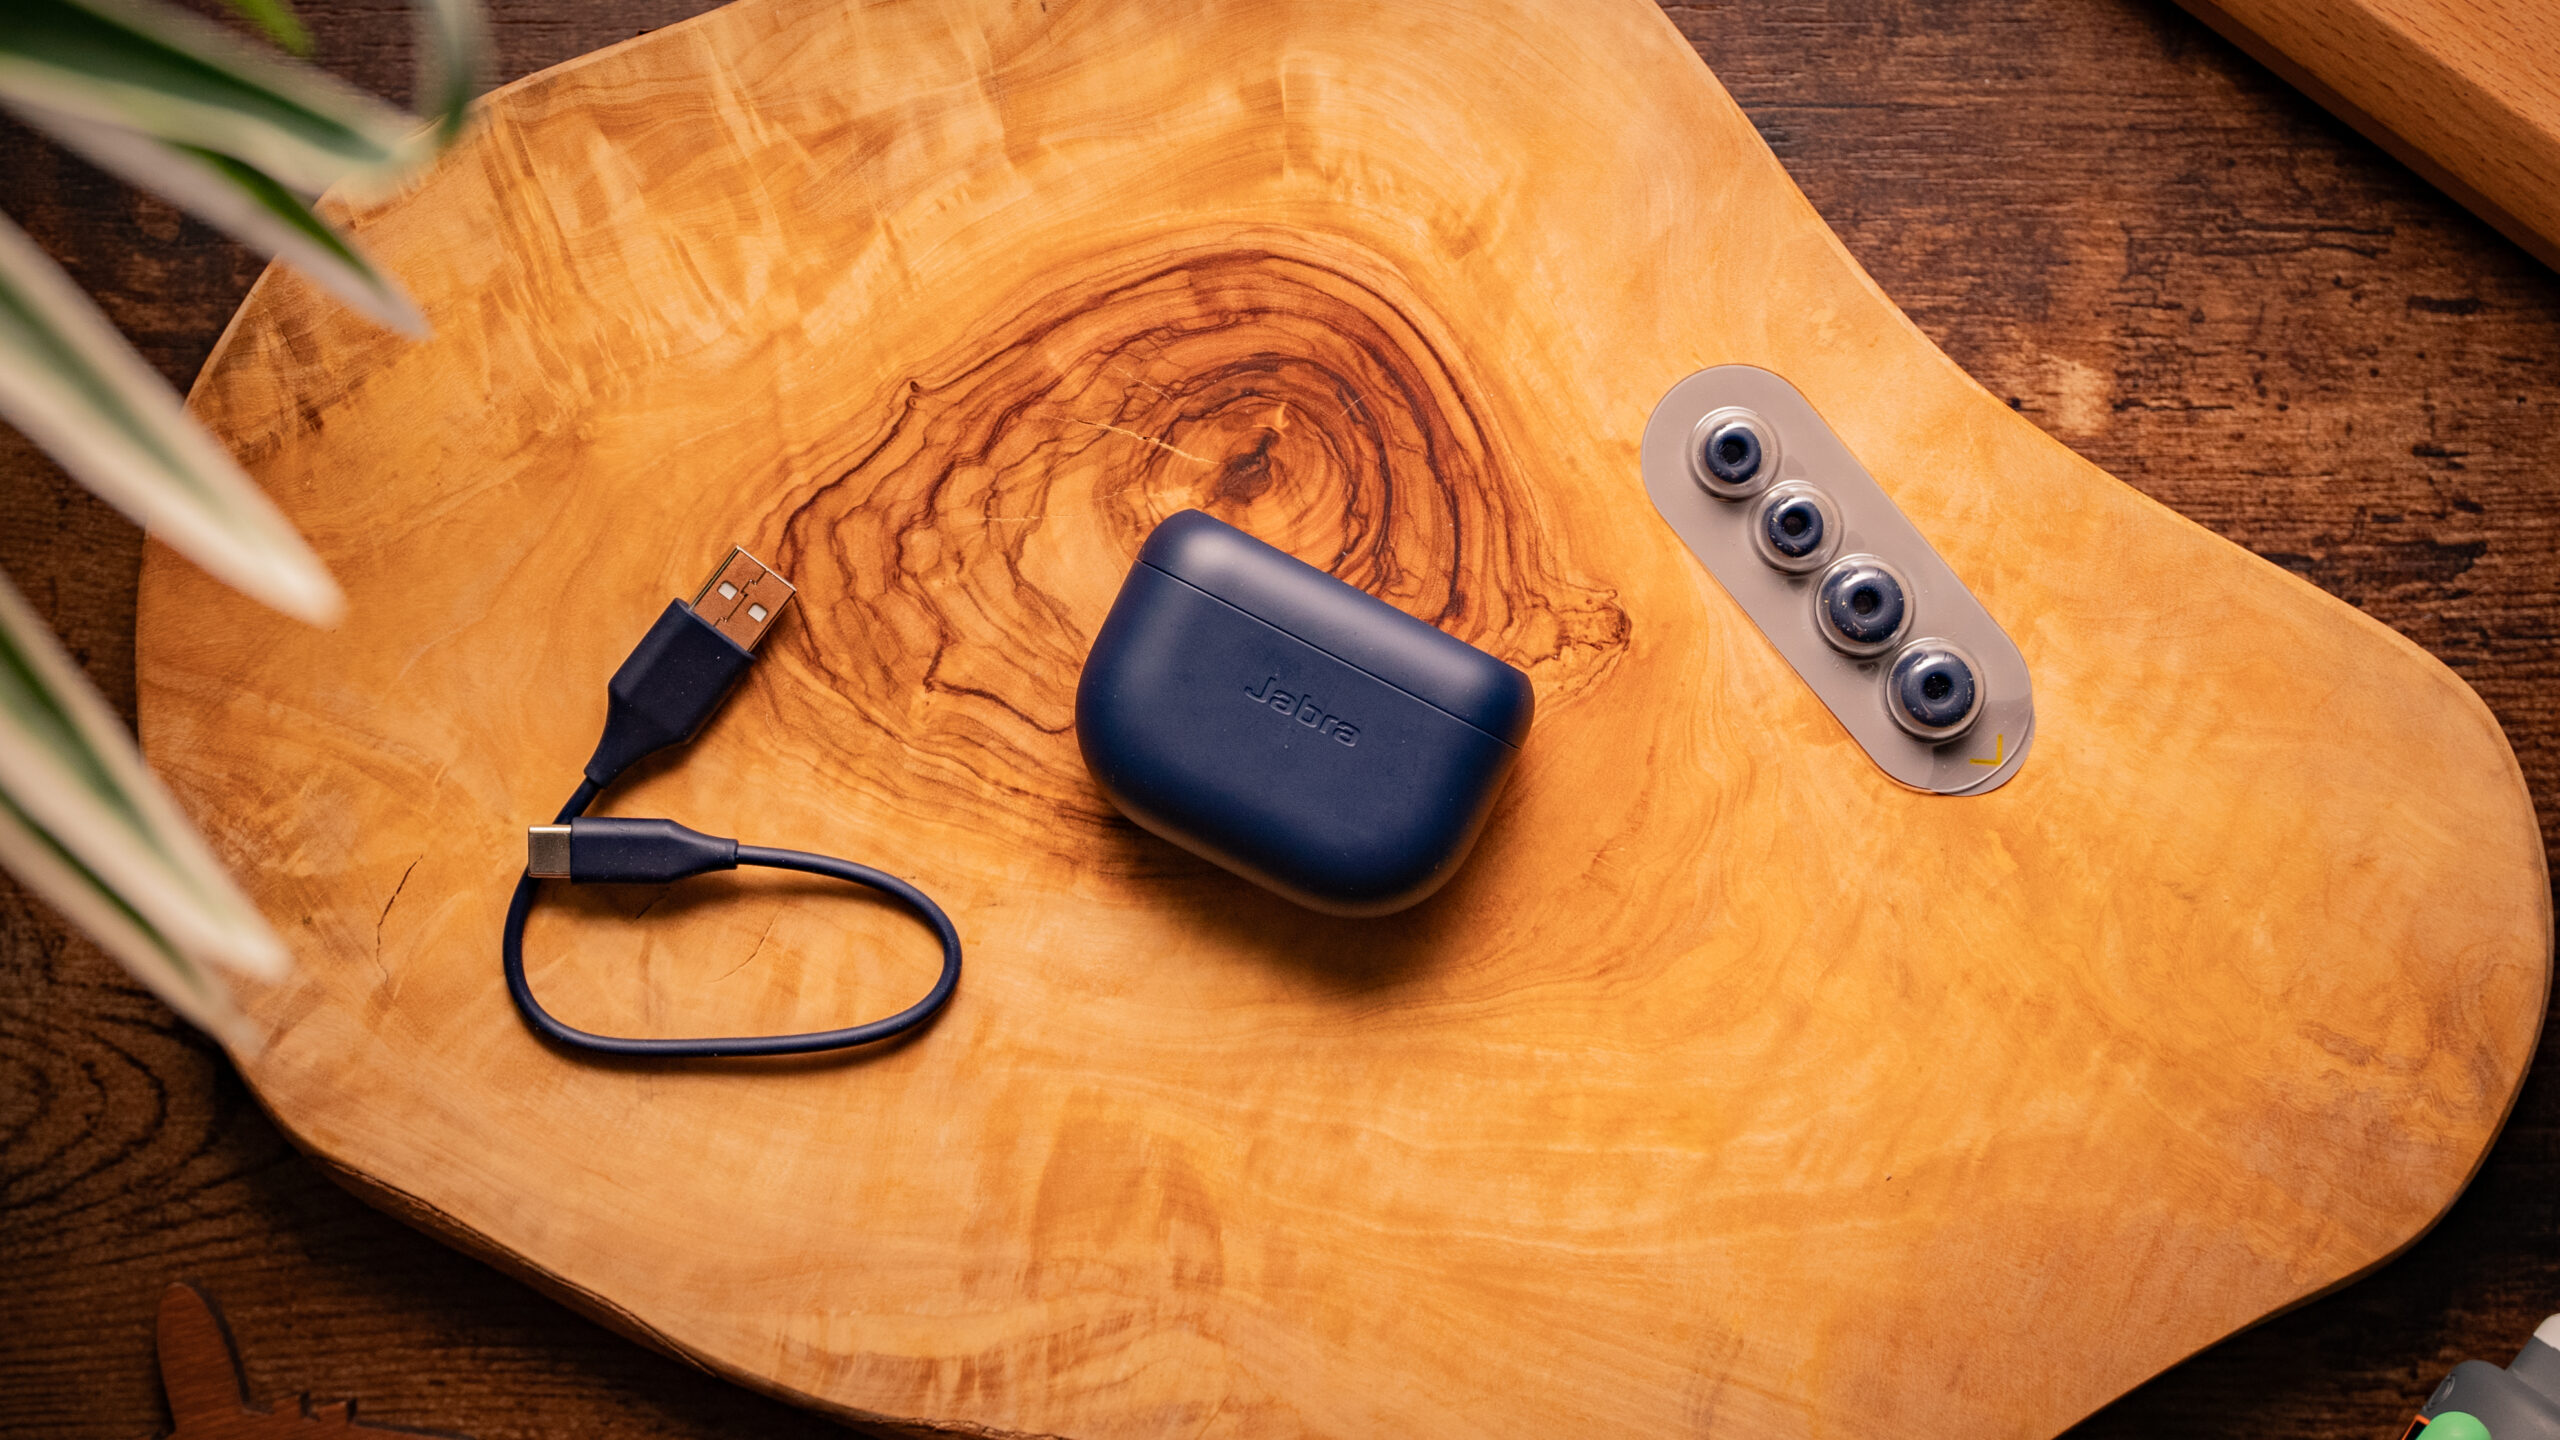 The Jabra Elite 8 Active case, USB-C cable, and ear tips spread out on a wood surface.